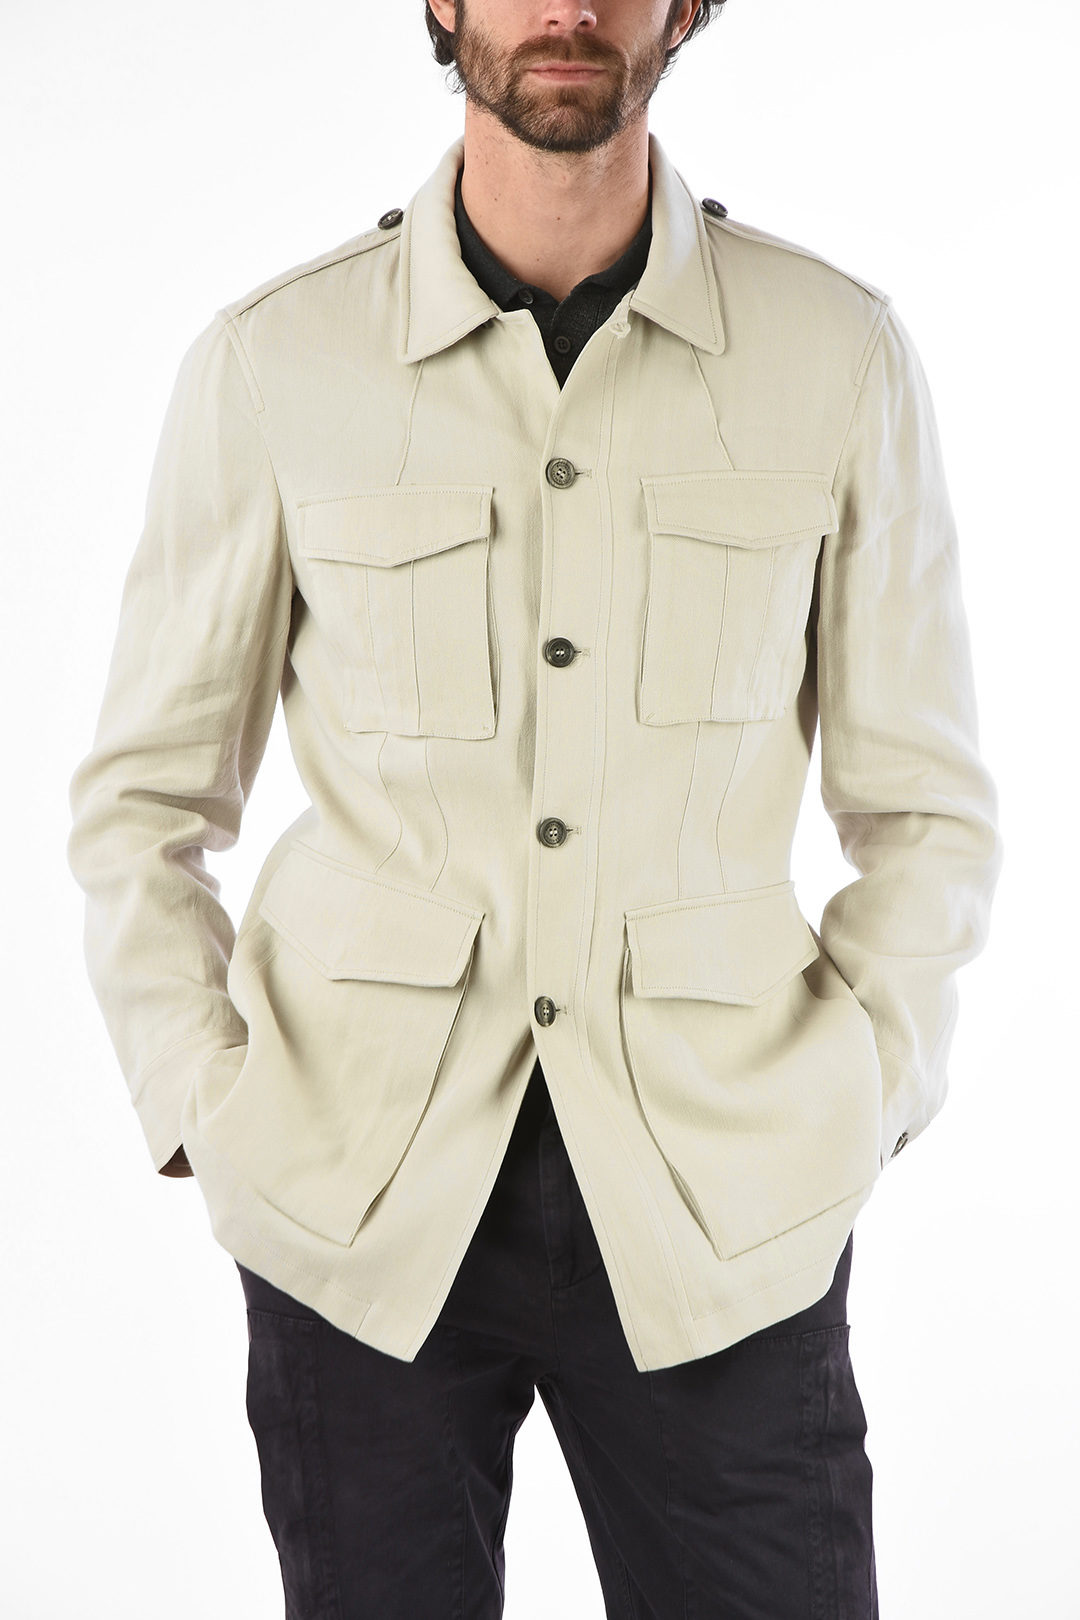 Suede Multi-pocket Autumn And Winter Jacket | Mens jackets, Winter jackets,  Casual jacket